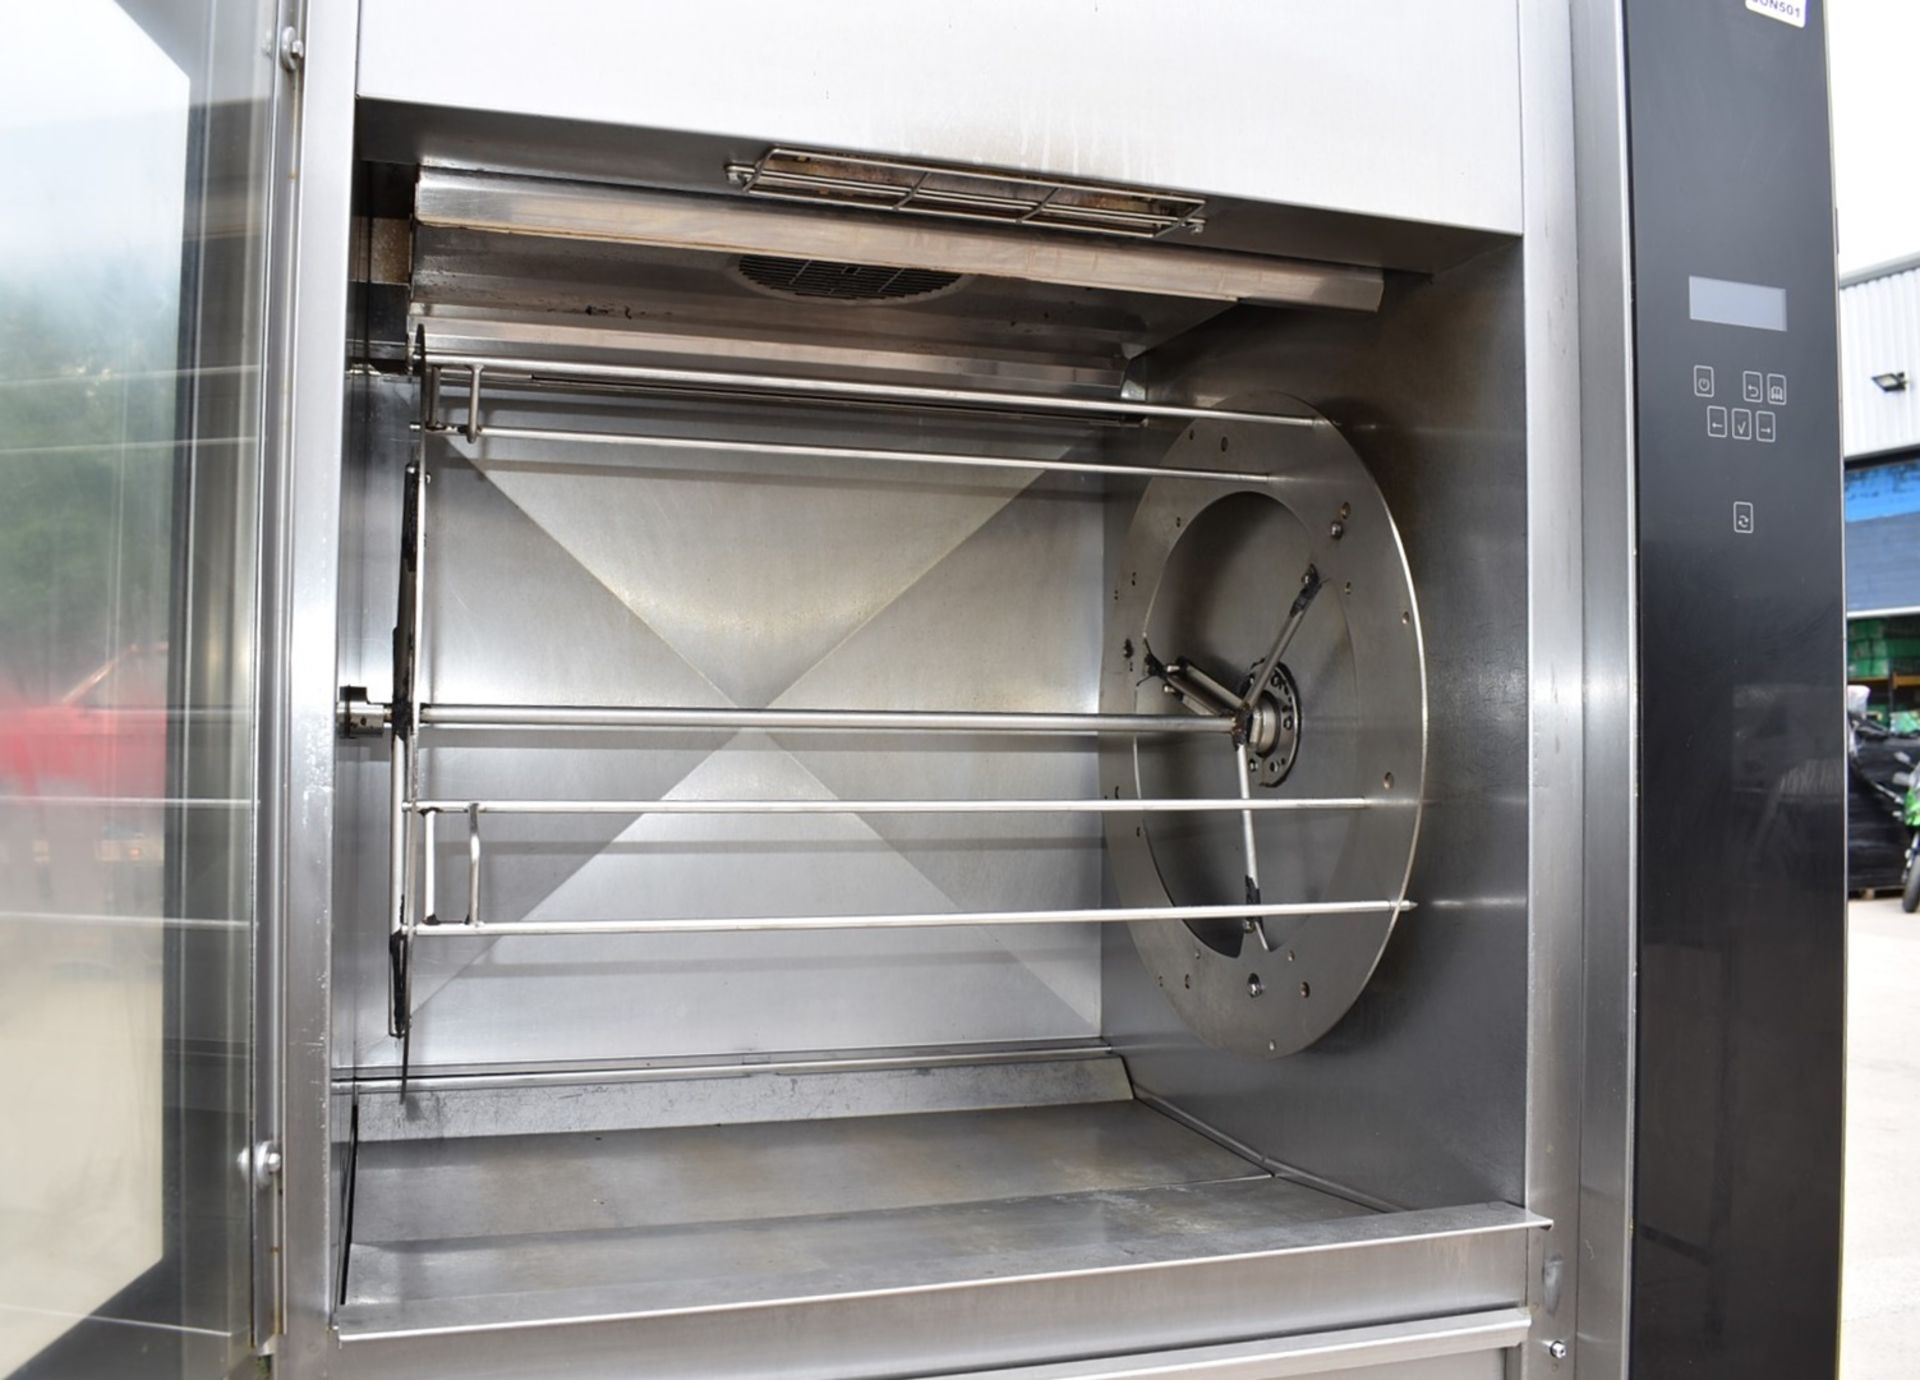 1 x Houno Electric Combi Oven and Fri-jado Rotisserie Oven Combo With Stand - 3 Phase - Image 8 of 22